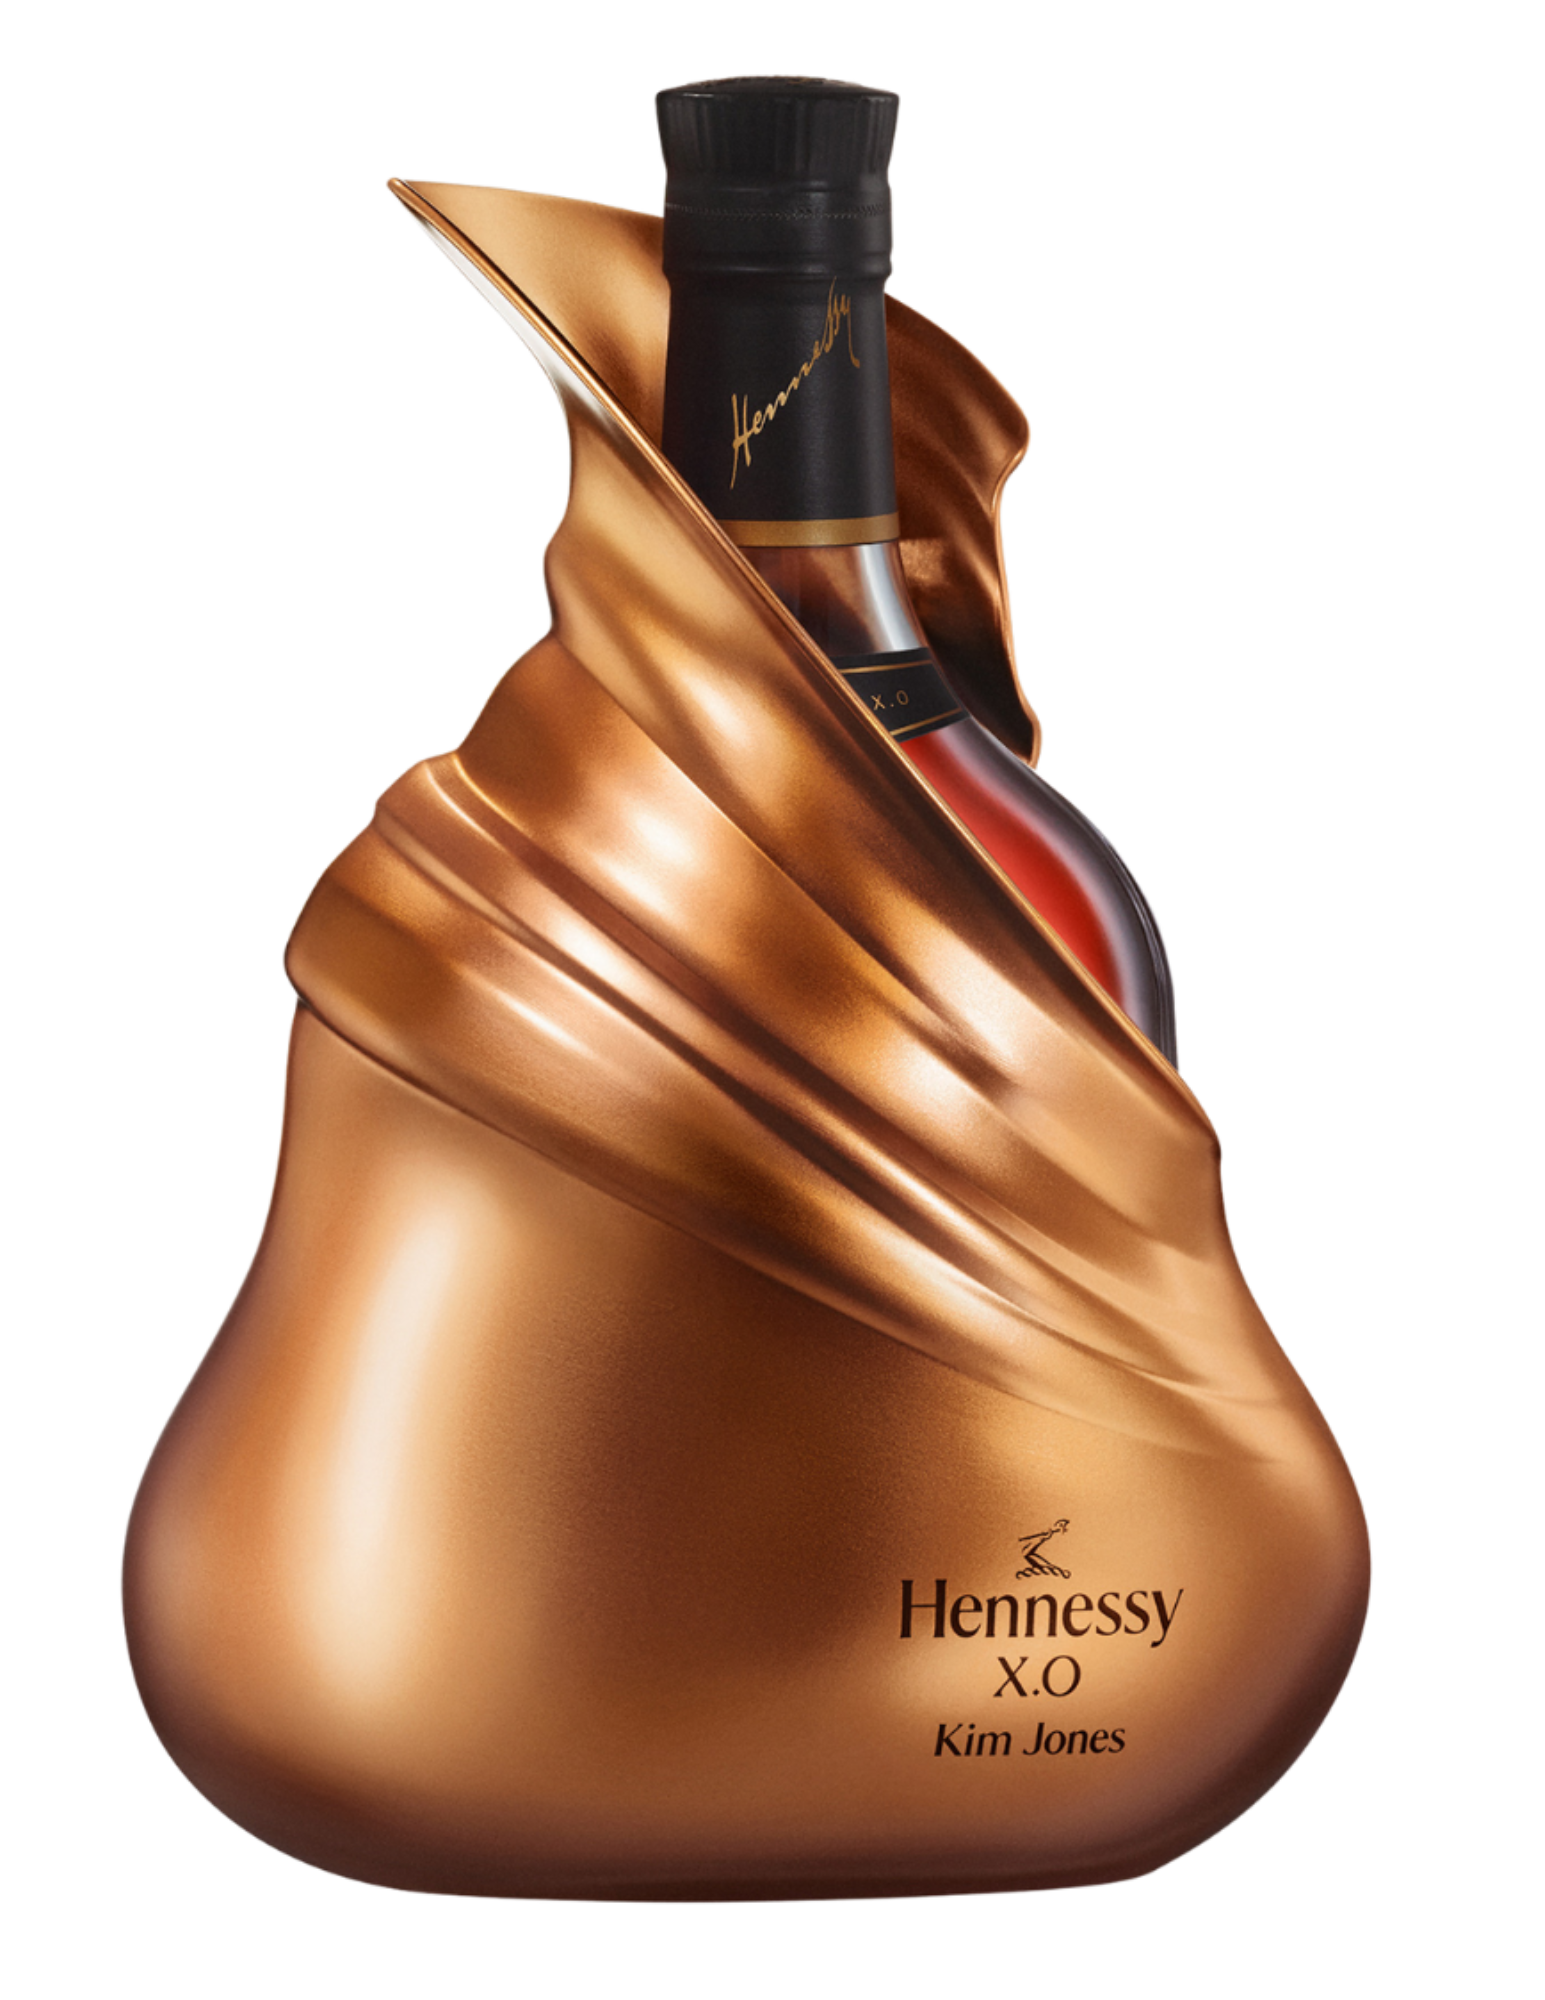 hennessy louis